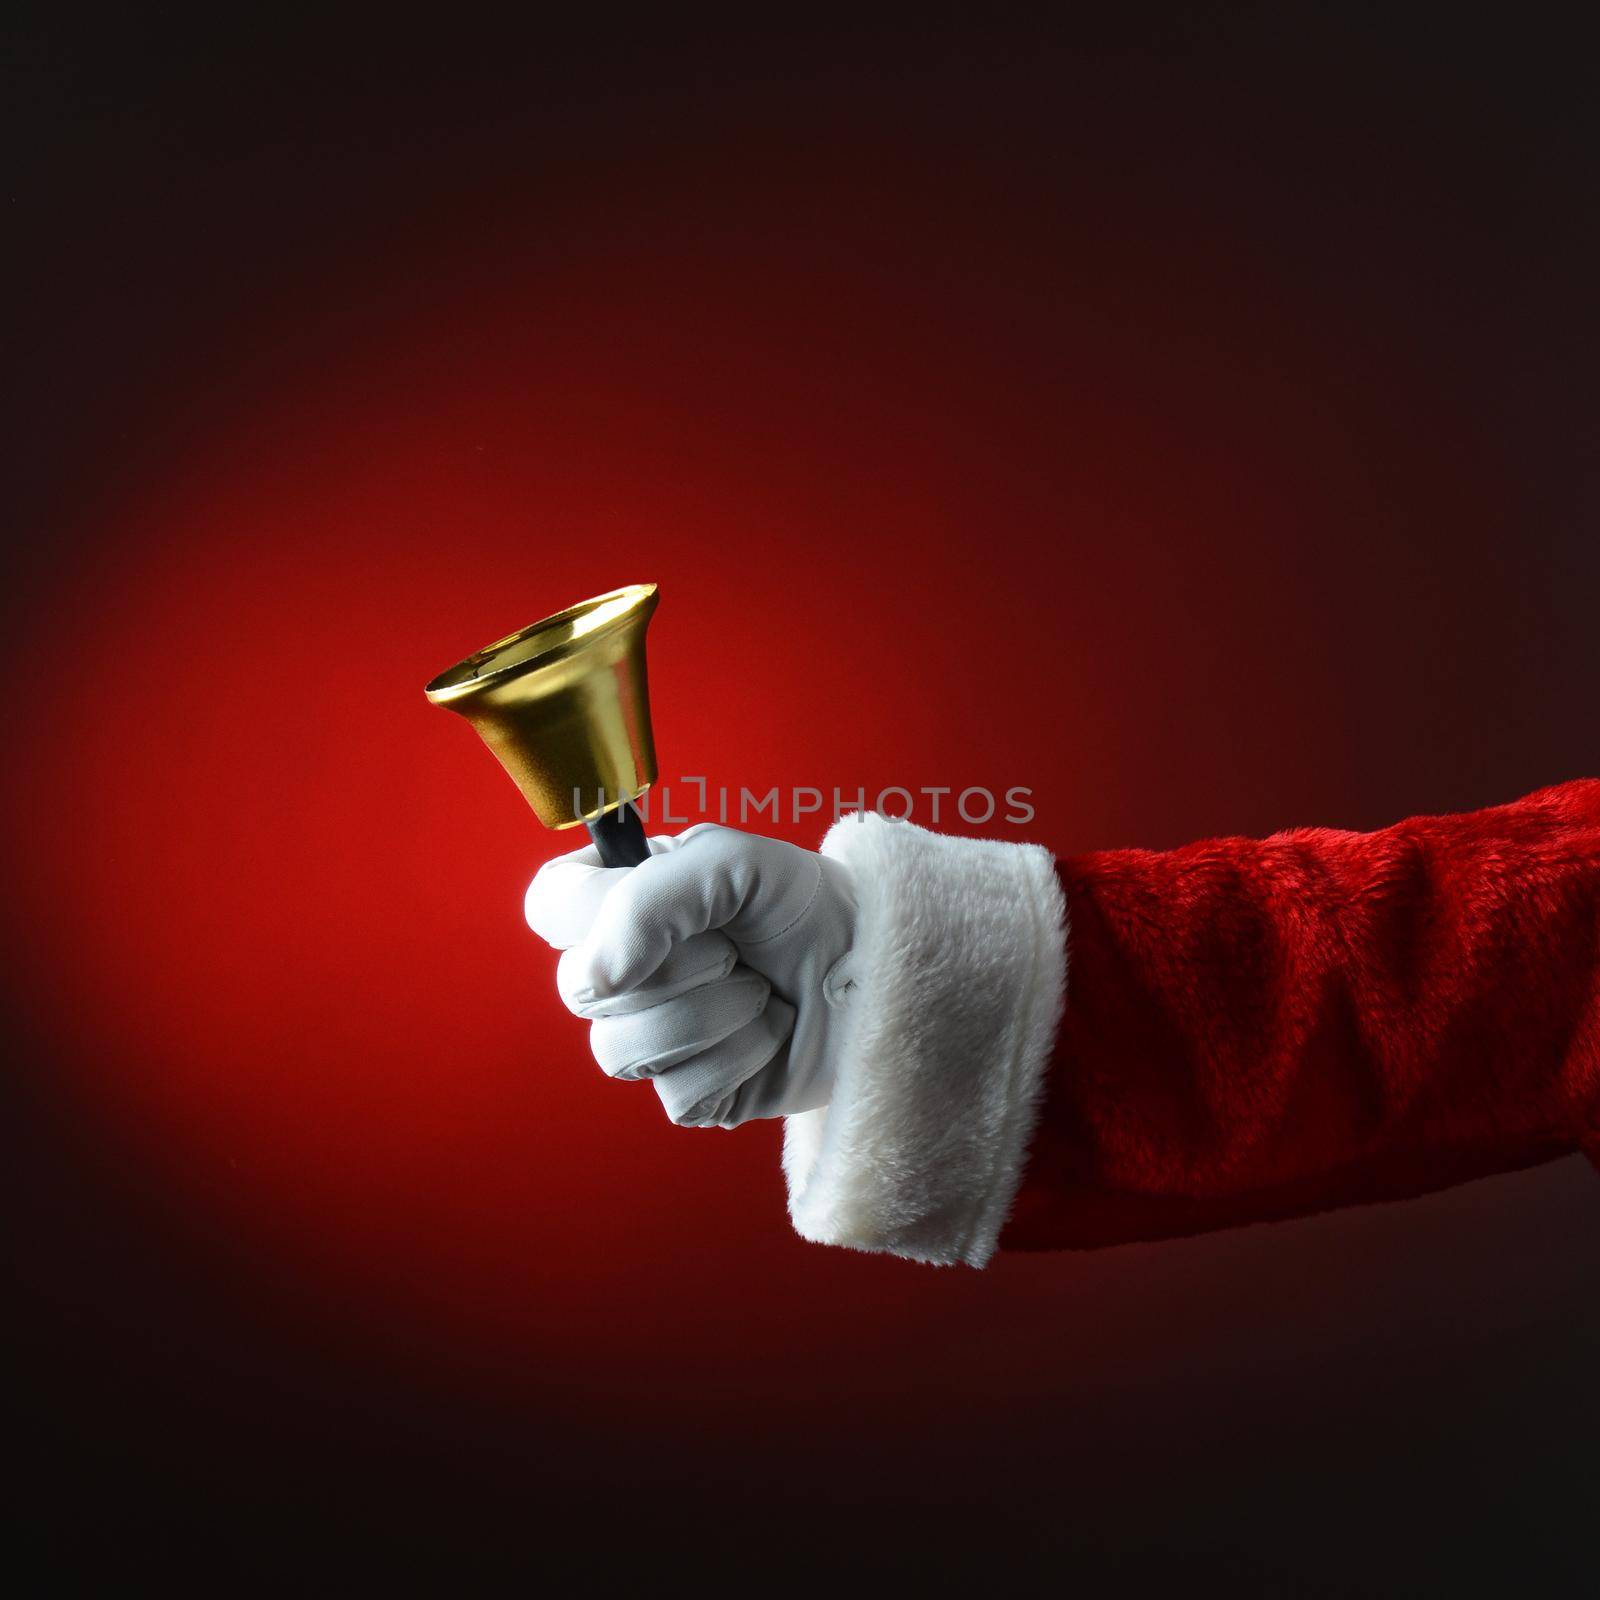 Santa Claus ringing a bell over dark red background. Square Format, only hand and arm are visible.